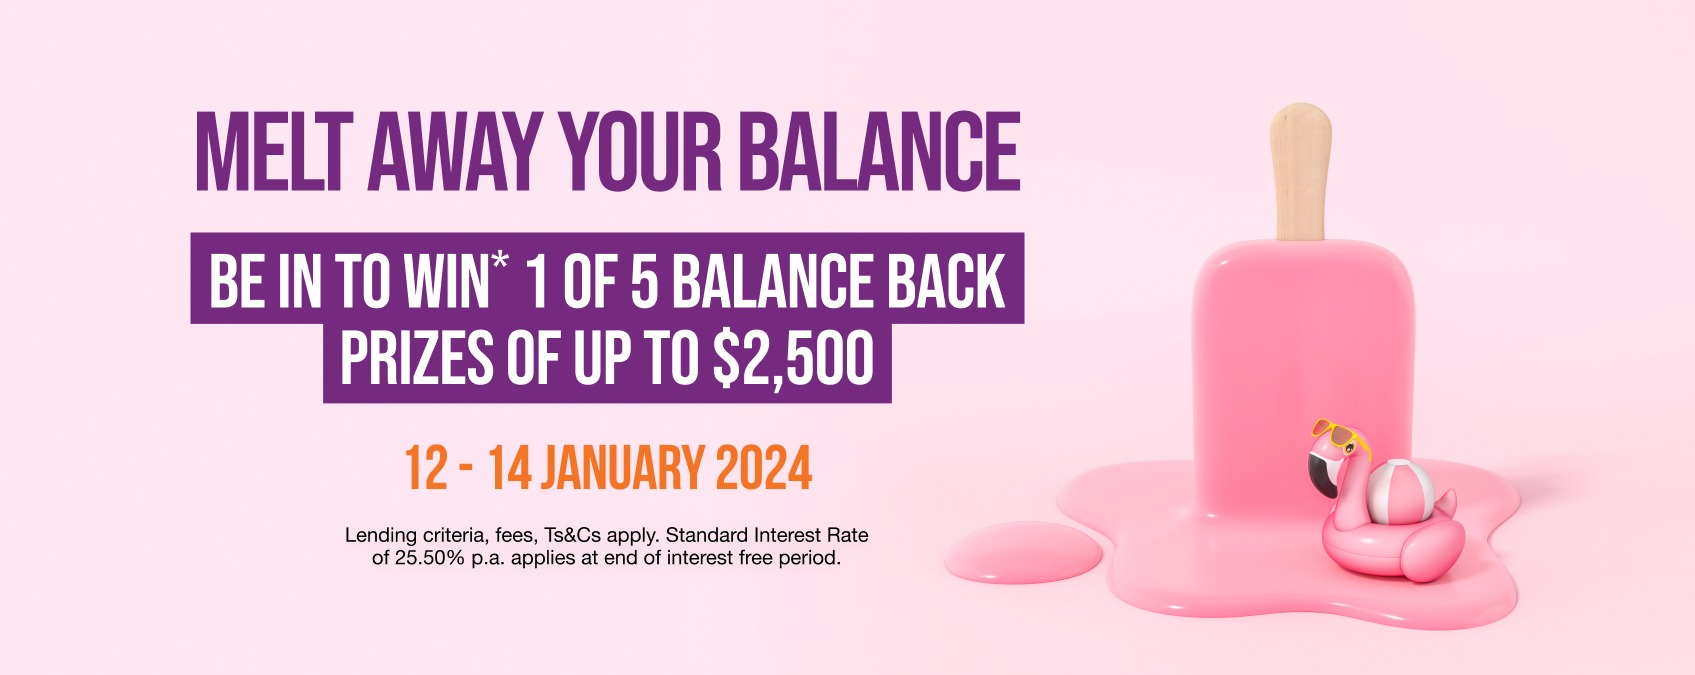 Double chances weekend to win your balance back, up to $2,500